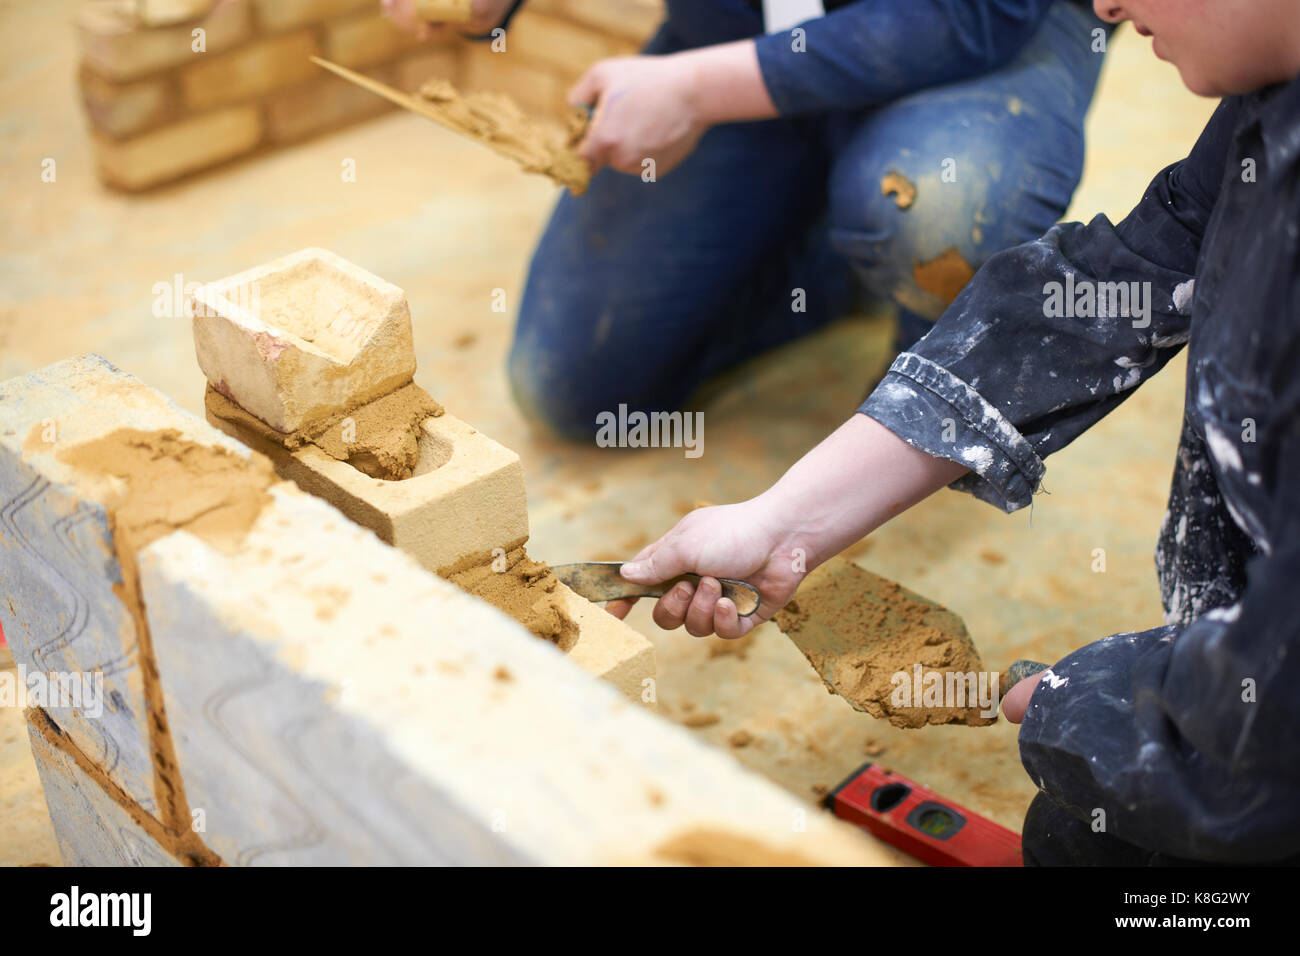 Student learning how to do building work Stock Photo